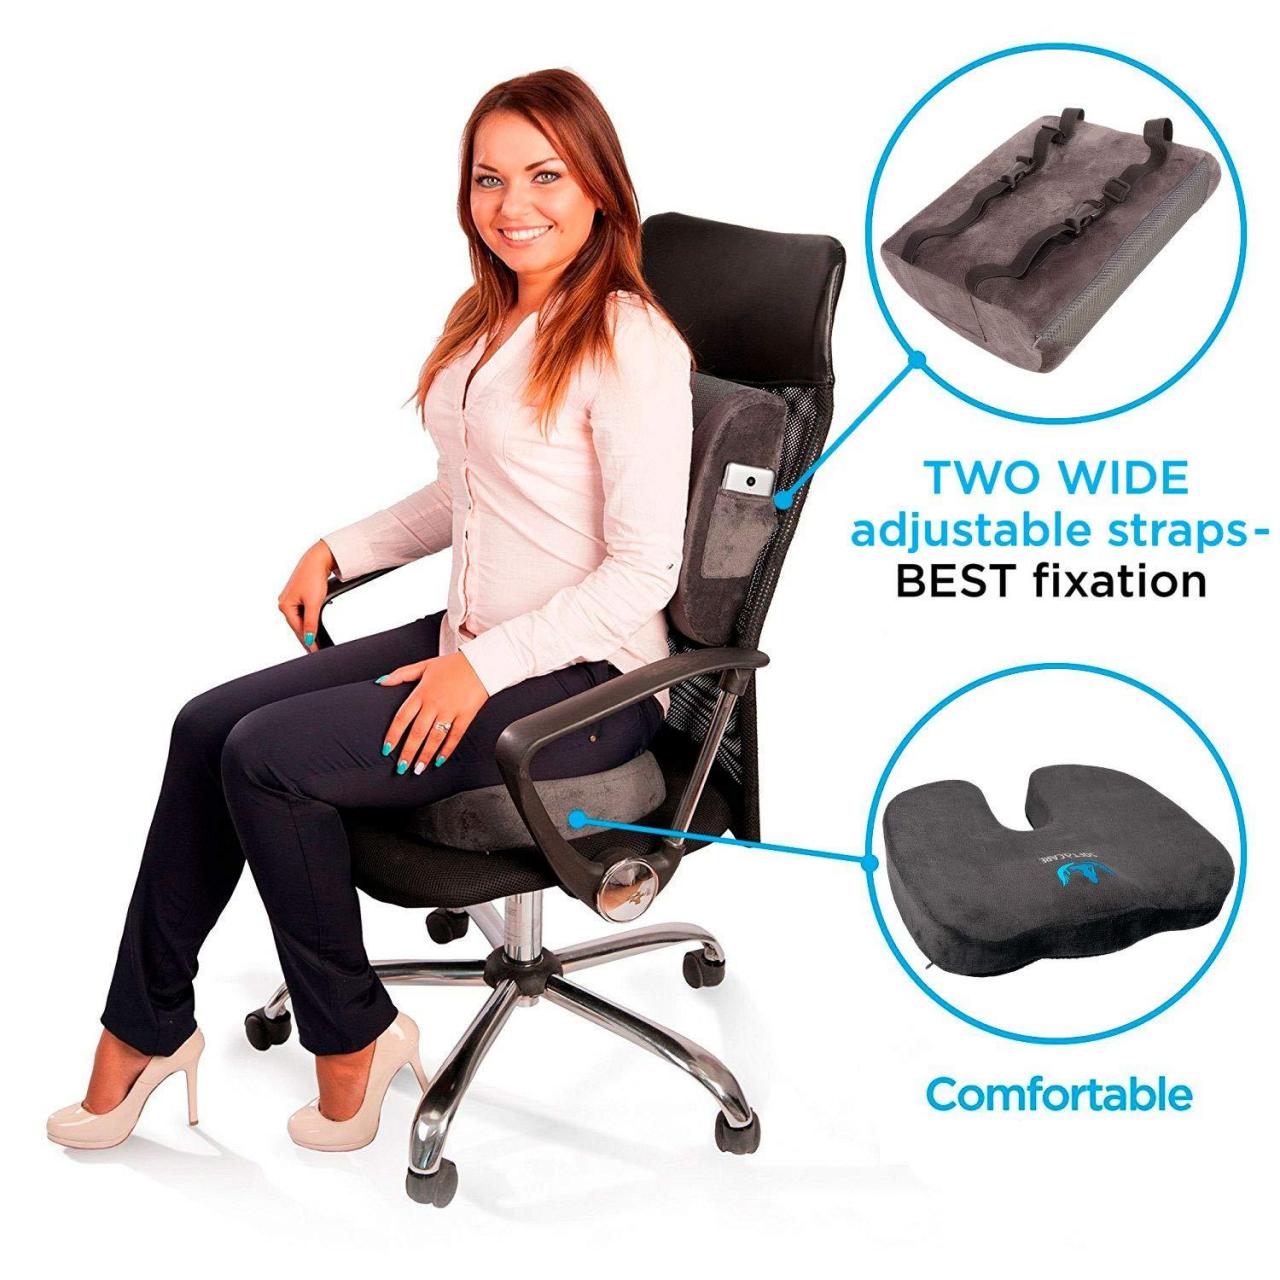 Buy SOFTaCARE Best Seat Cushion - Big Cushion Seat - Office Chair Cushion  18x16x3 1/2- Chair Pillow Memory Foam! Ideal Car Seat Cushion-Coccyx Cushion-Relieve  Your Pain Size has The Meaning (Black) Online